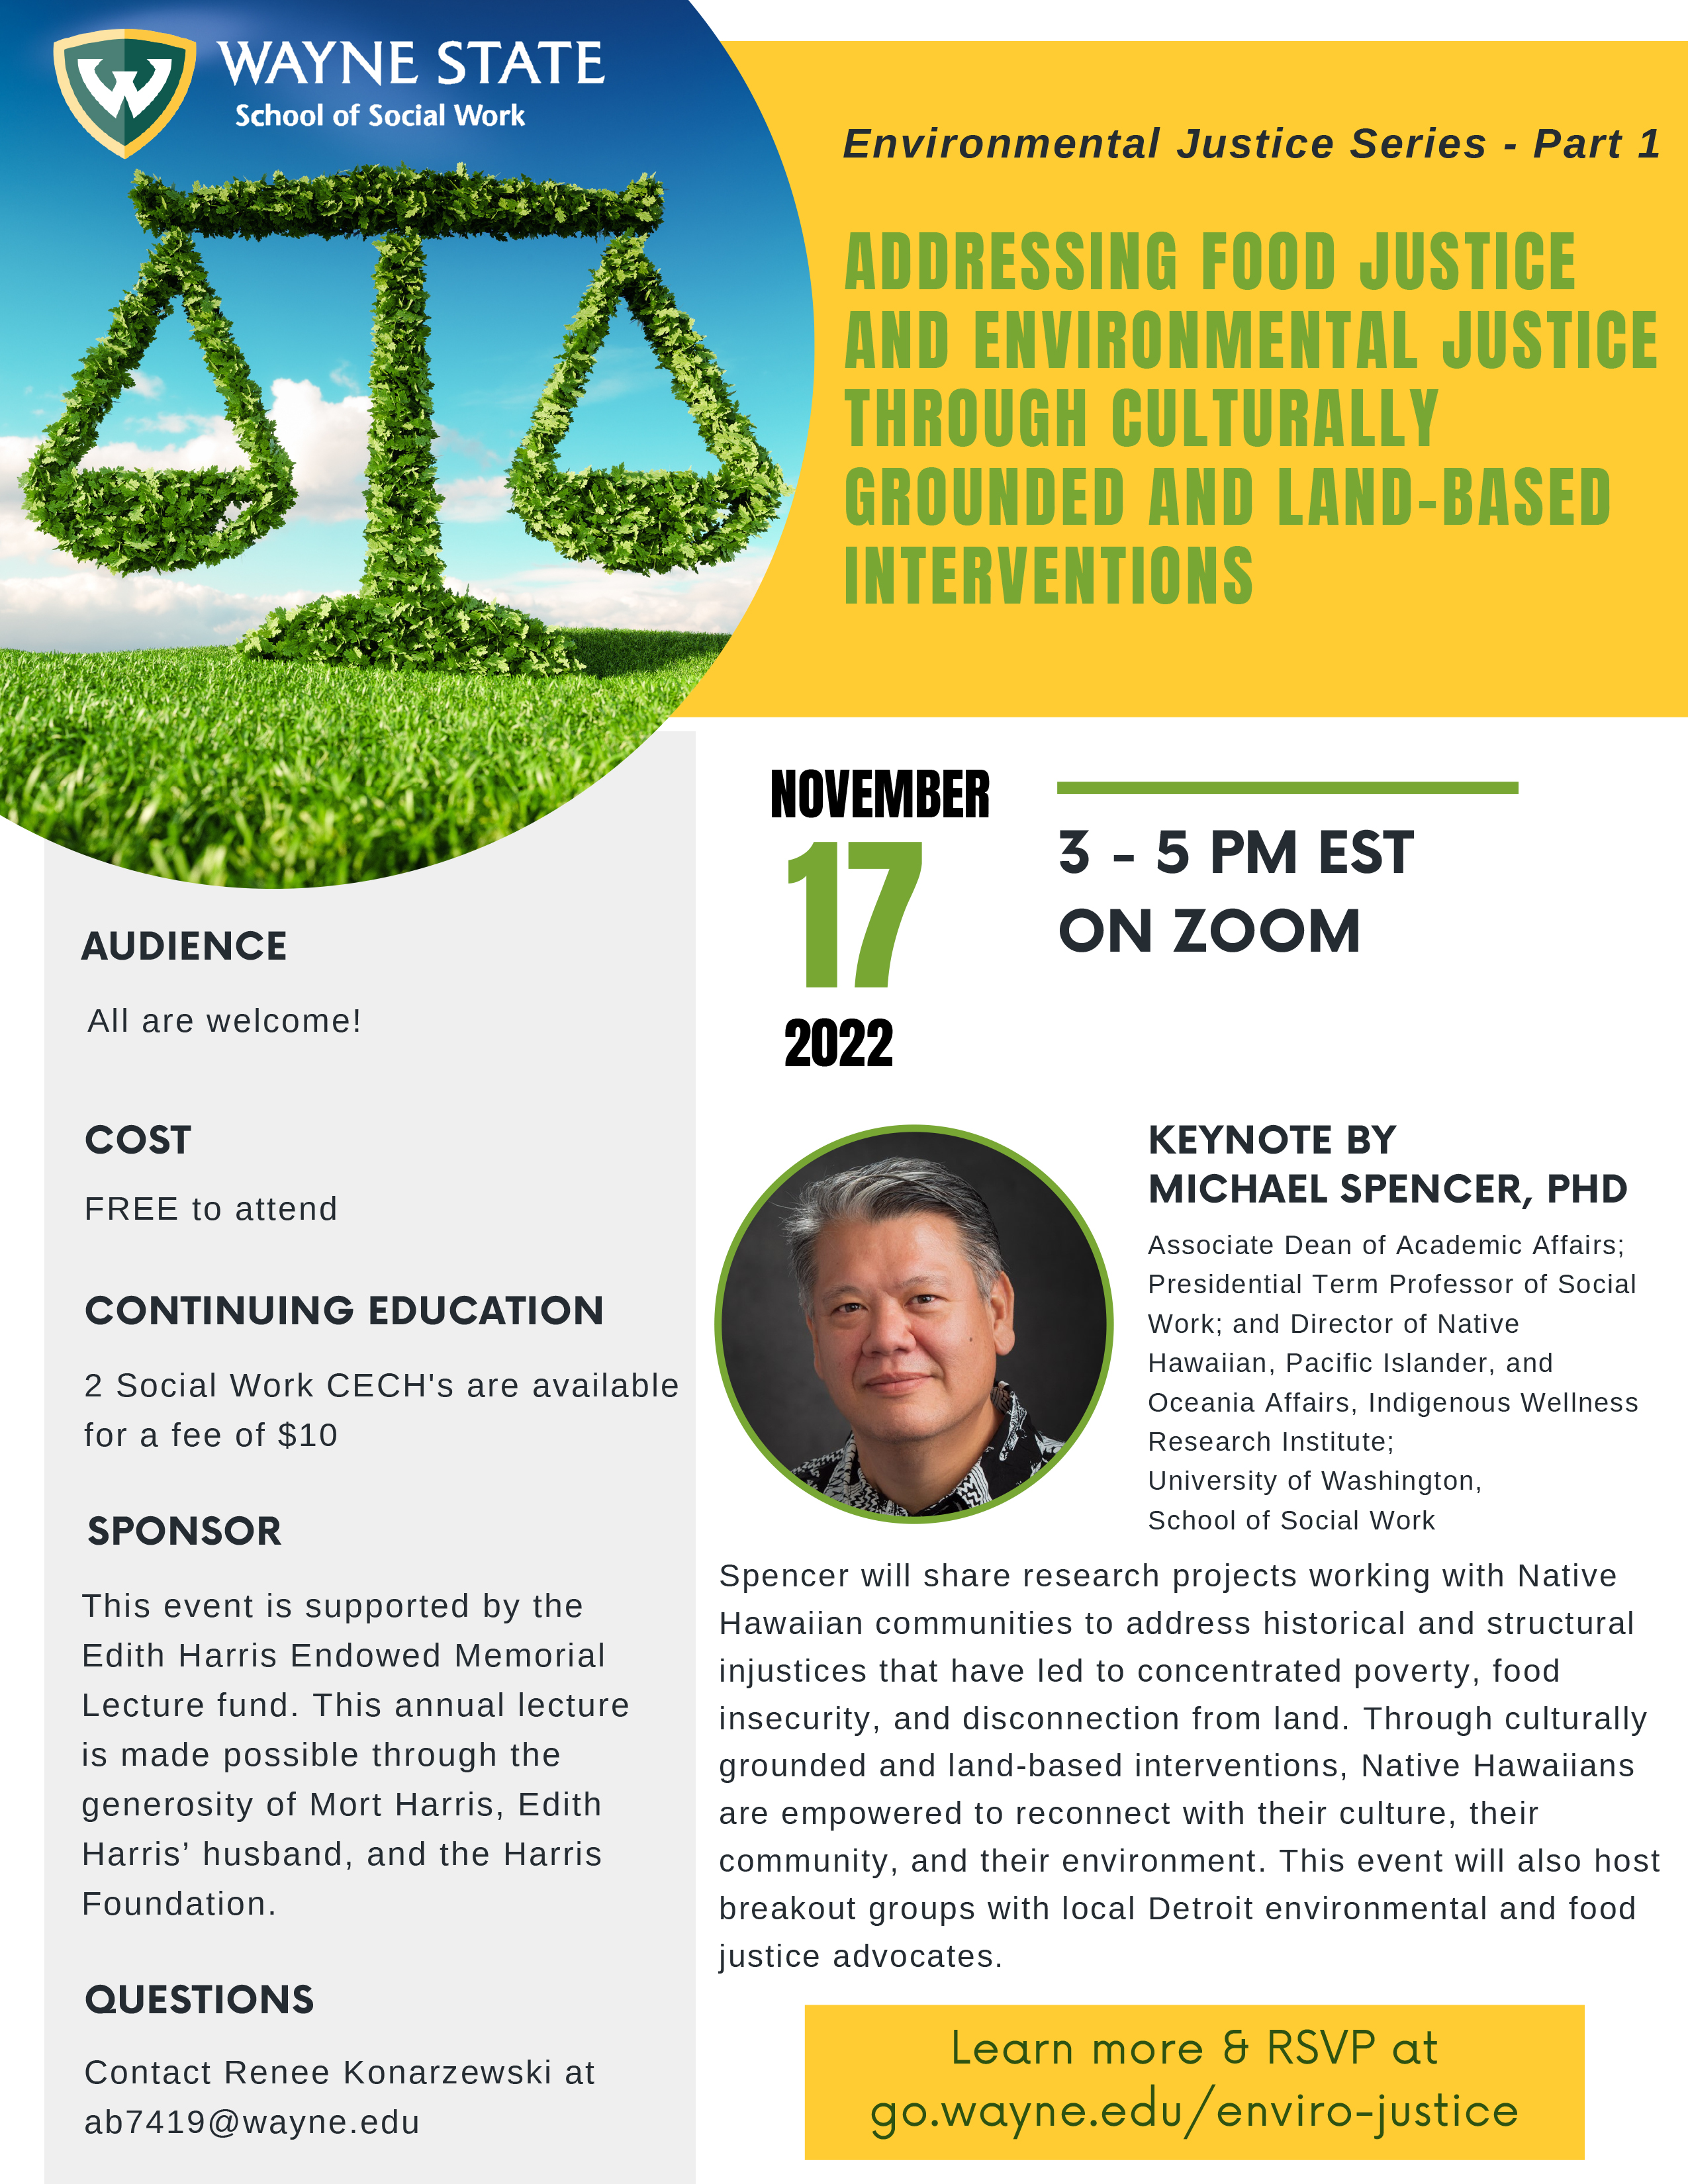 Addressing Food Justice and Environmental Justice through Culturally Grounded and Land-Based Interventions